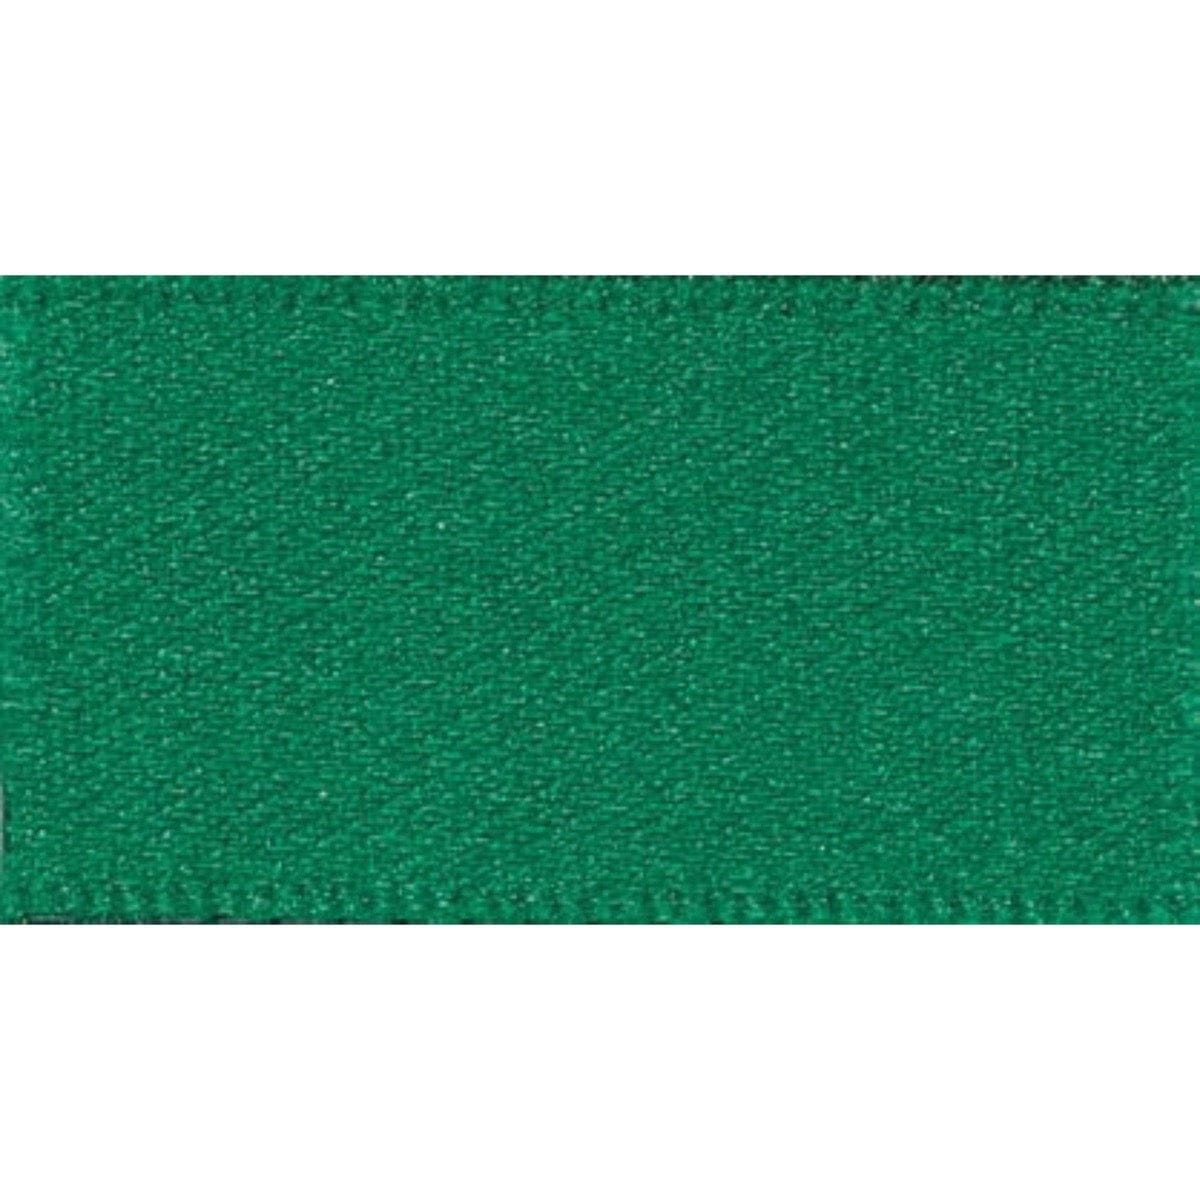 Double Faced Satin Ribbon Hunter Green: 25mm wide. Price per metre.